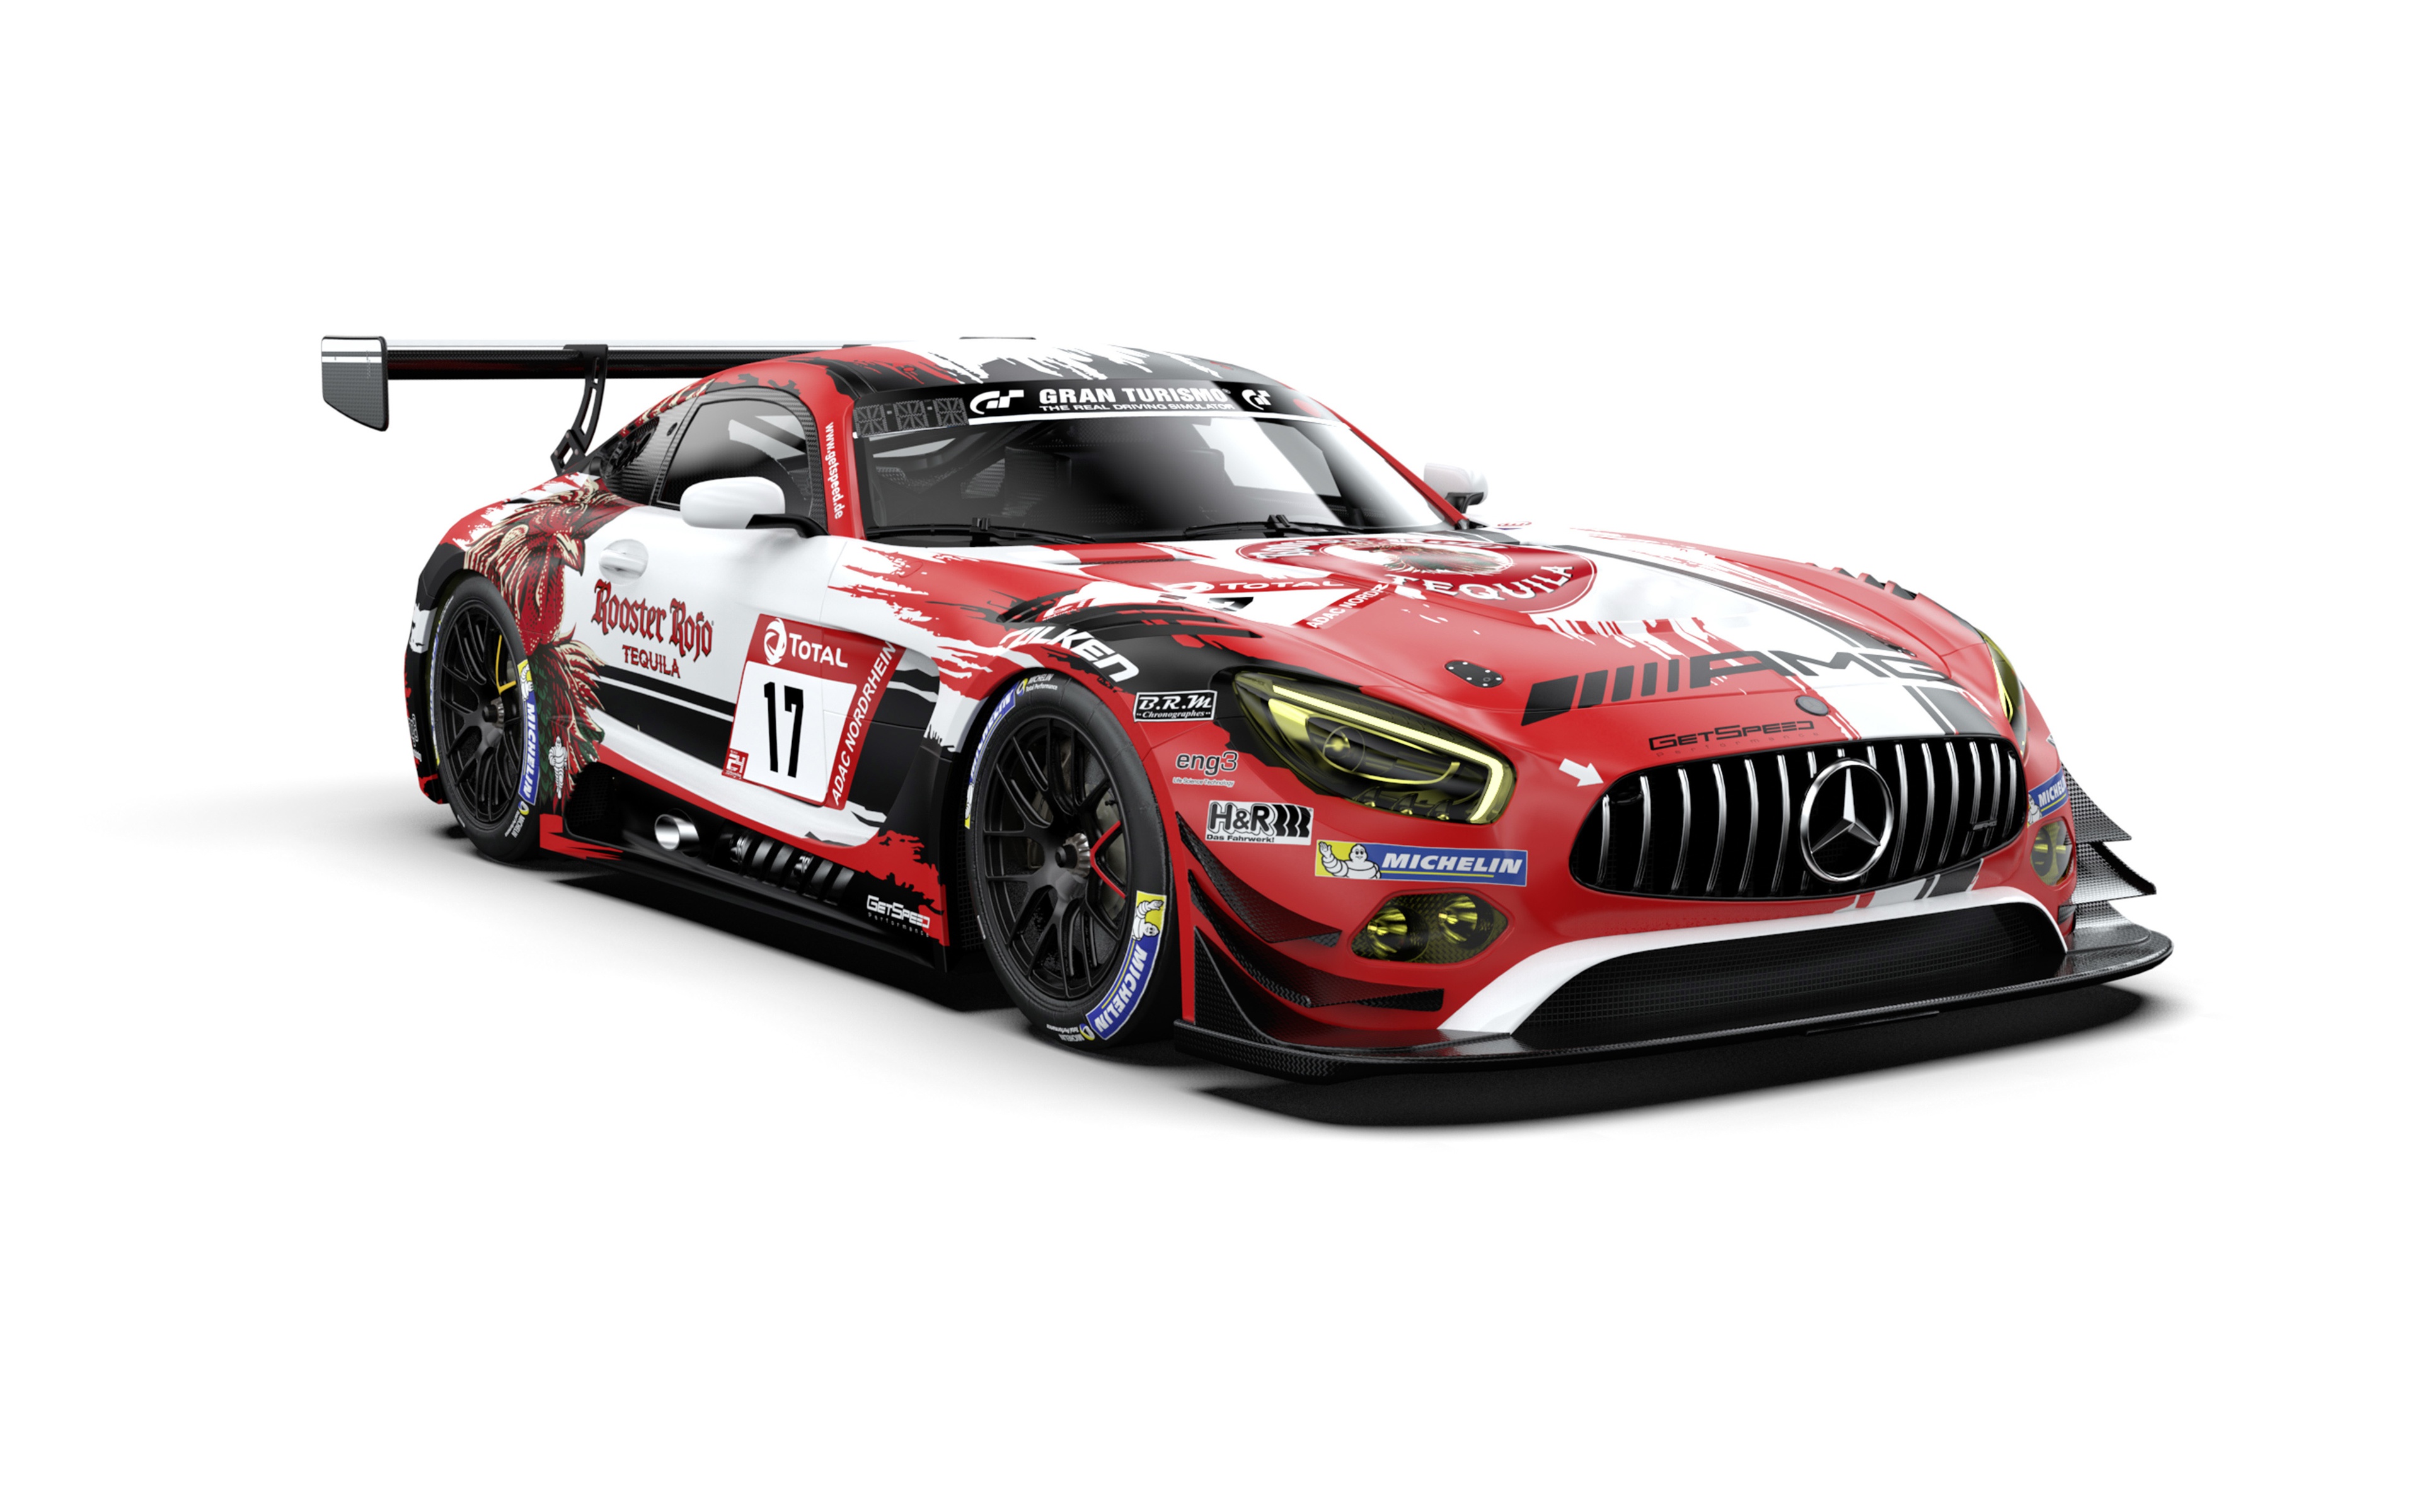 General 3840x2400 white background car race cars vehicle red cars Mercedes-Benz livery German cars